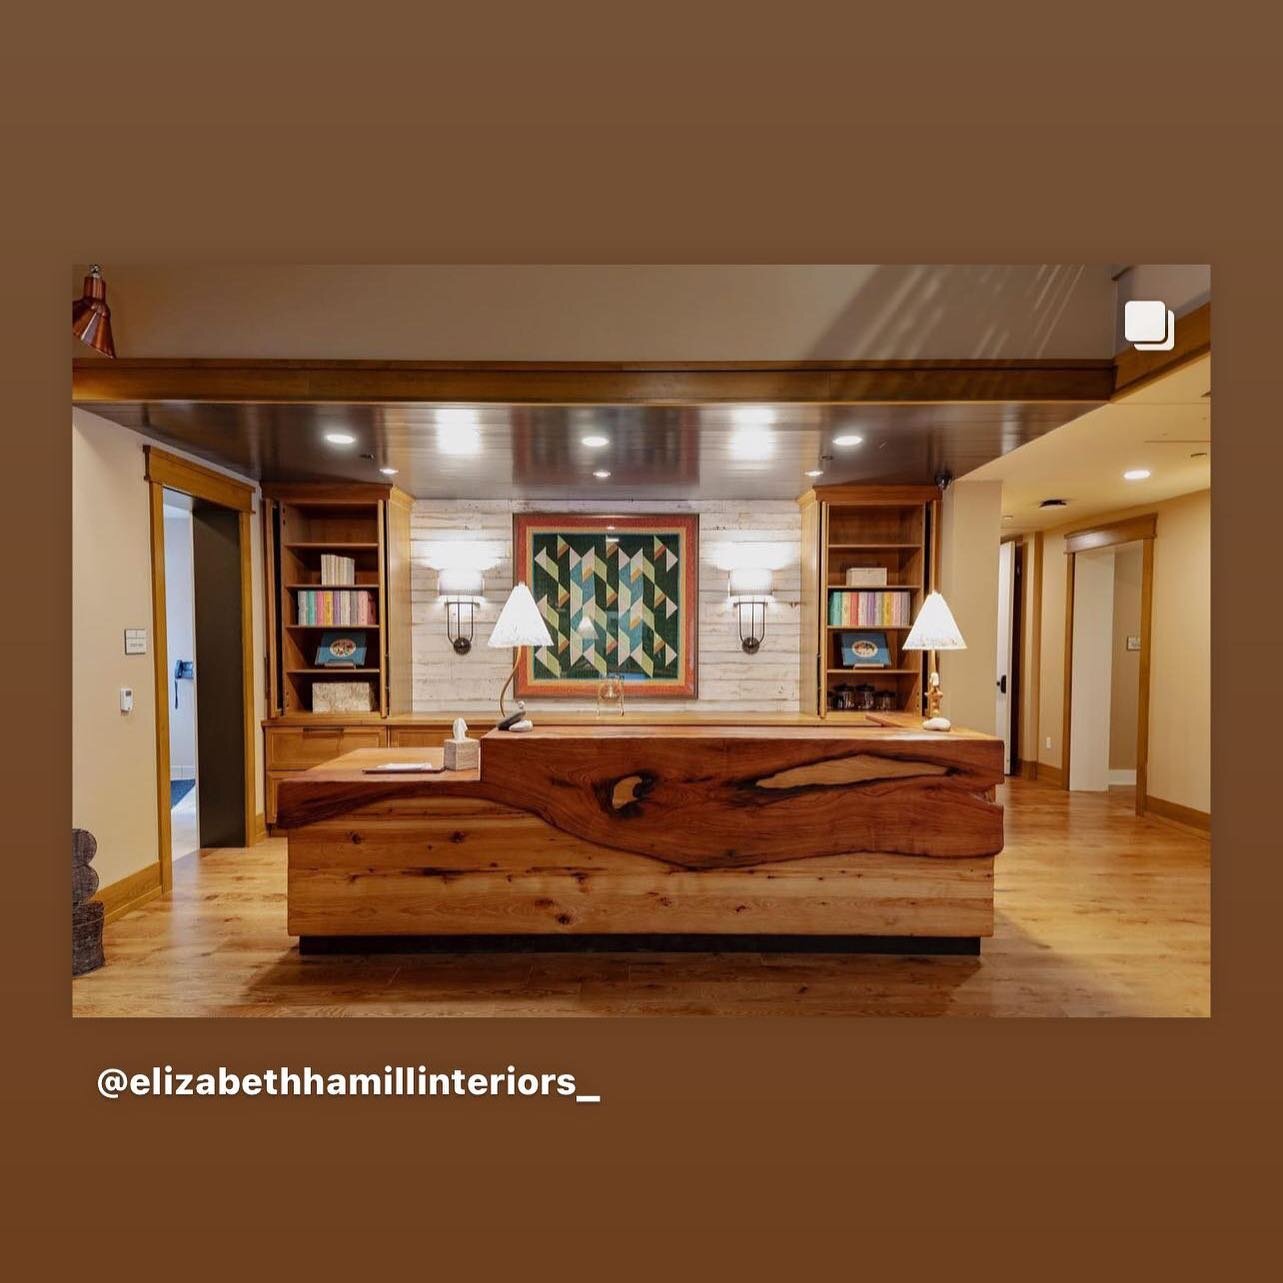 We crafted this reception desk using a massive mesquite slab with a natural edge. Designed by @elizabethhamillinteriors_  for the @sentryworld resort #naturaledge #hospitality #golf #resort #sentryworld #craftsmanship #millwork